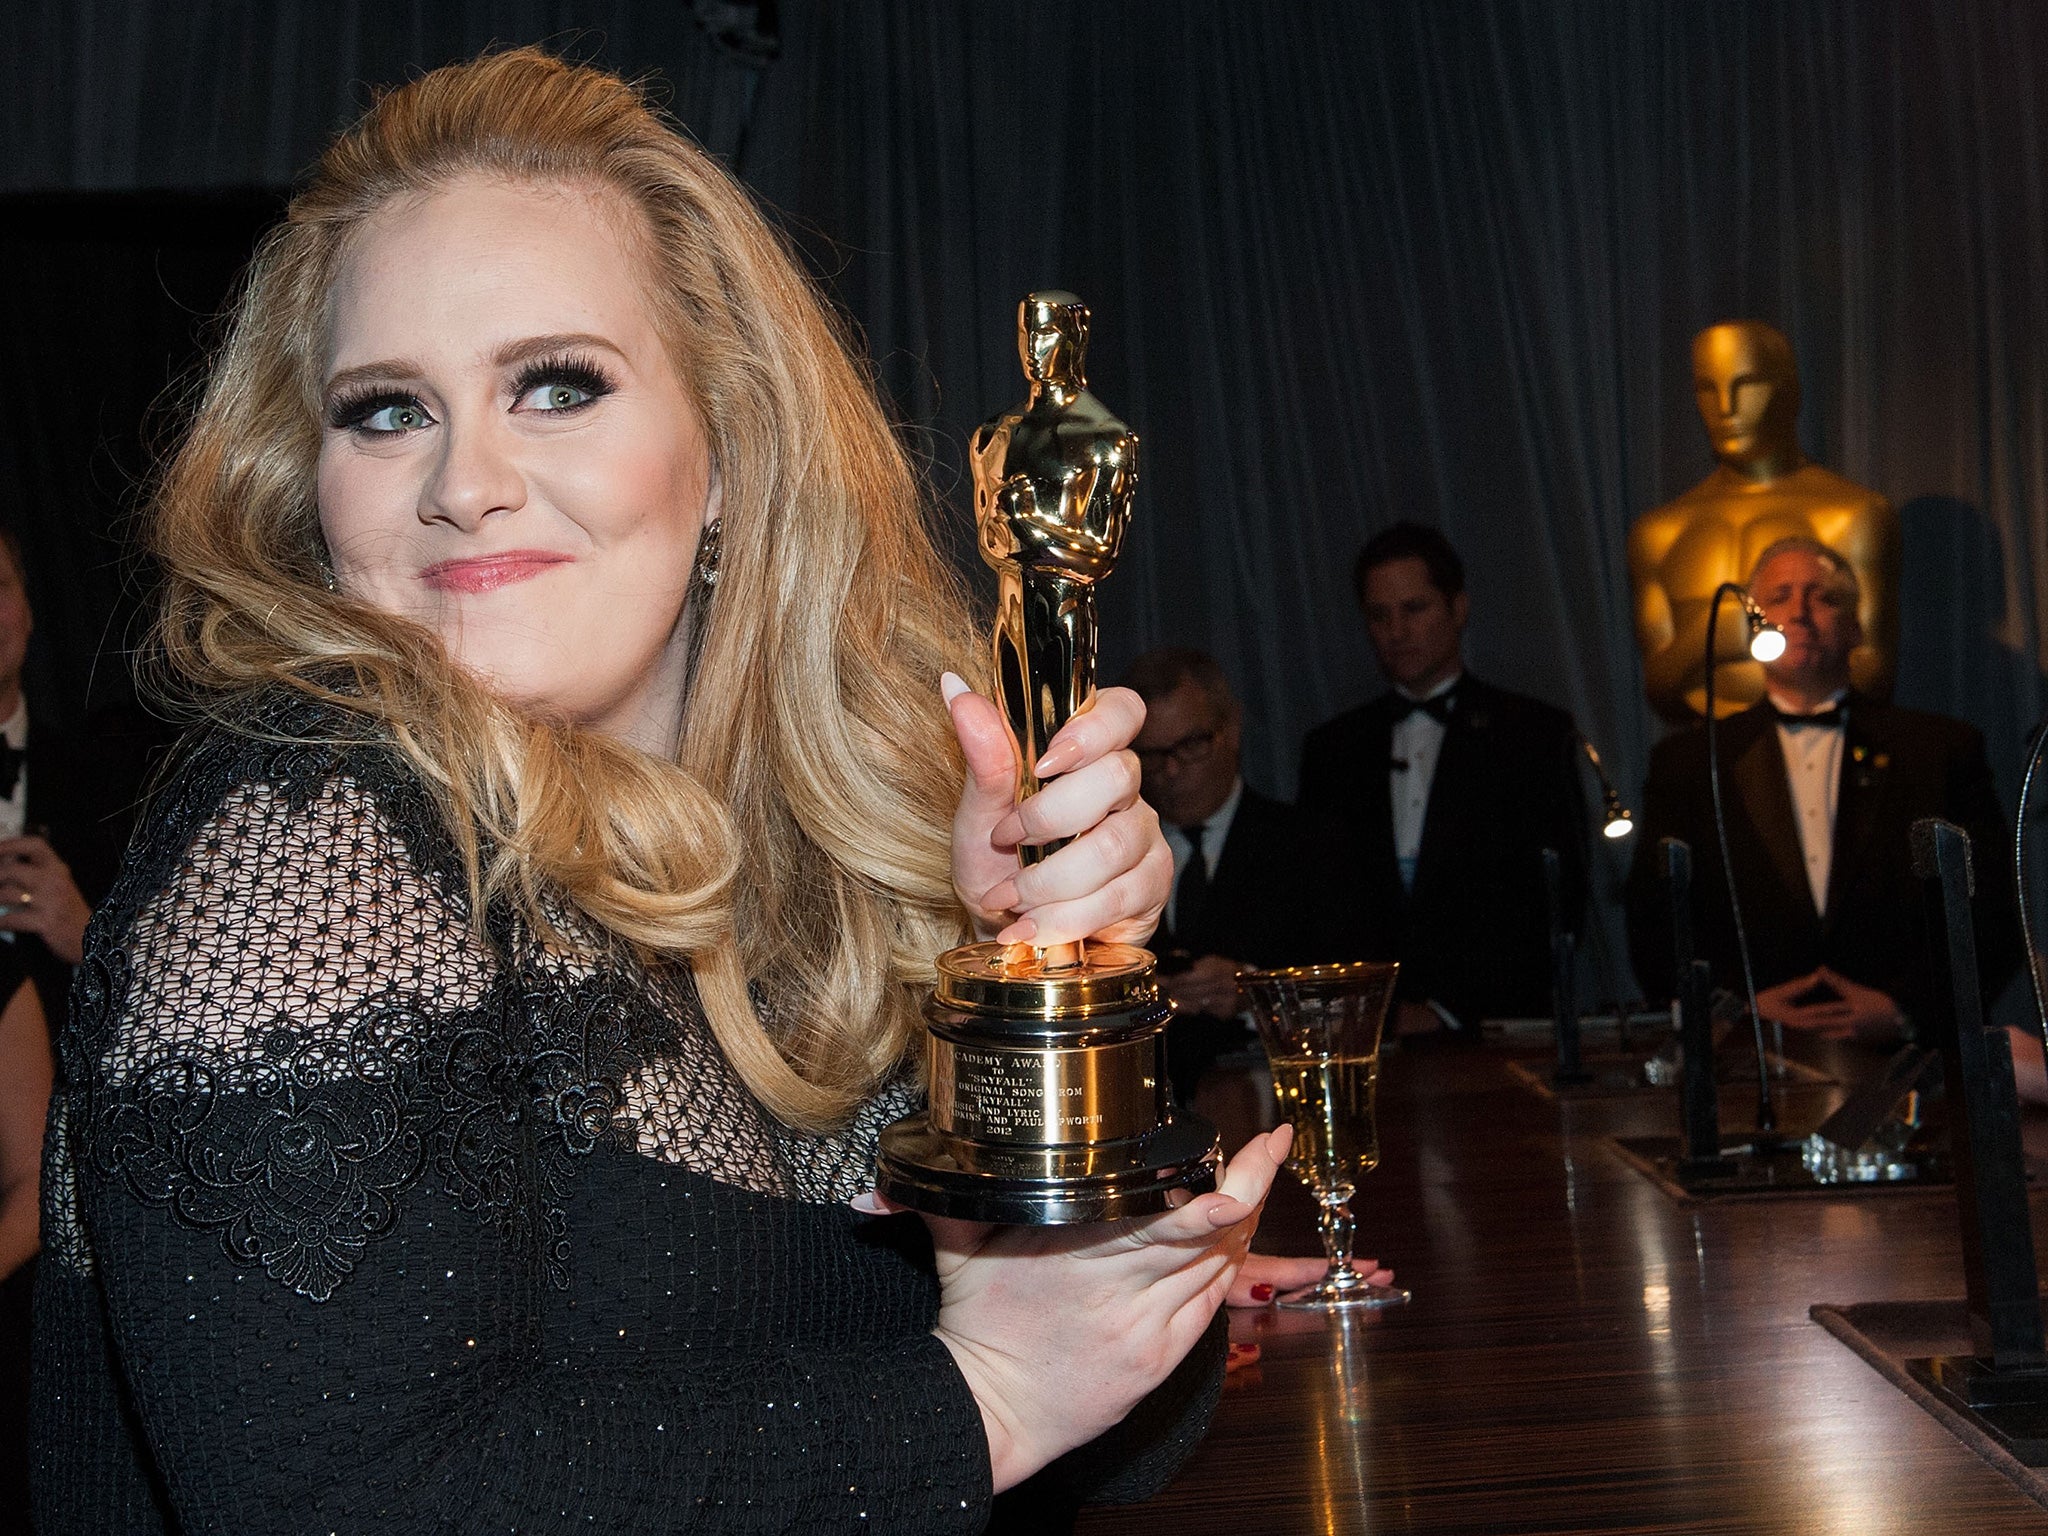 Adele arrives at the 2013 Oscars Governors Ball on February 24, 2013 in Hollywood, California